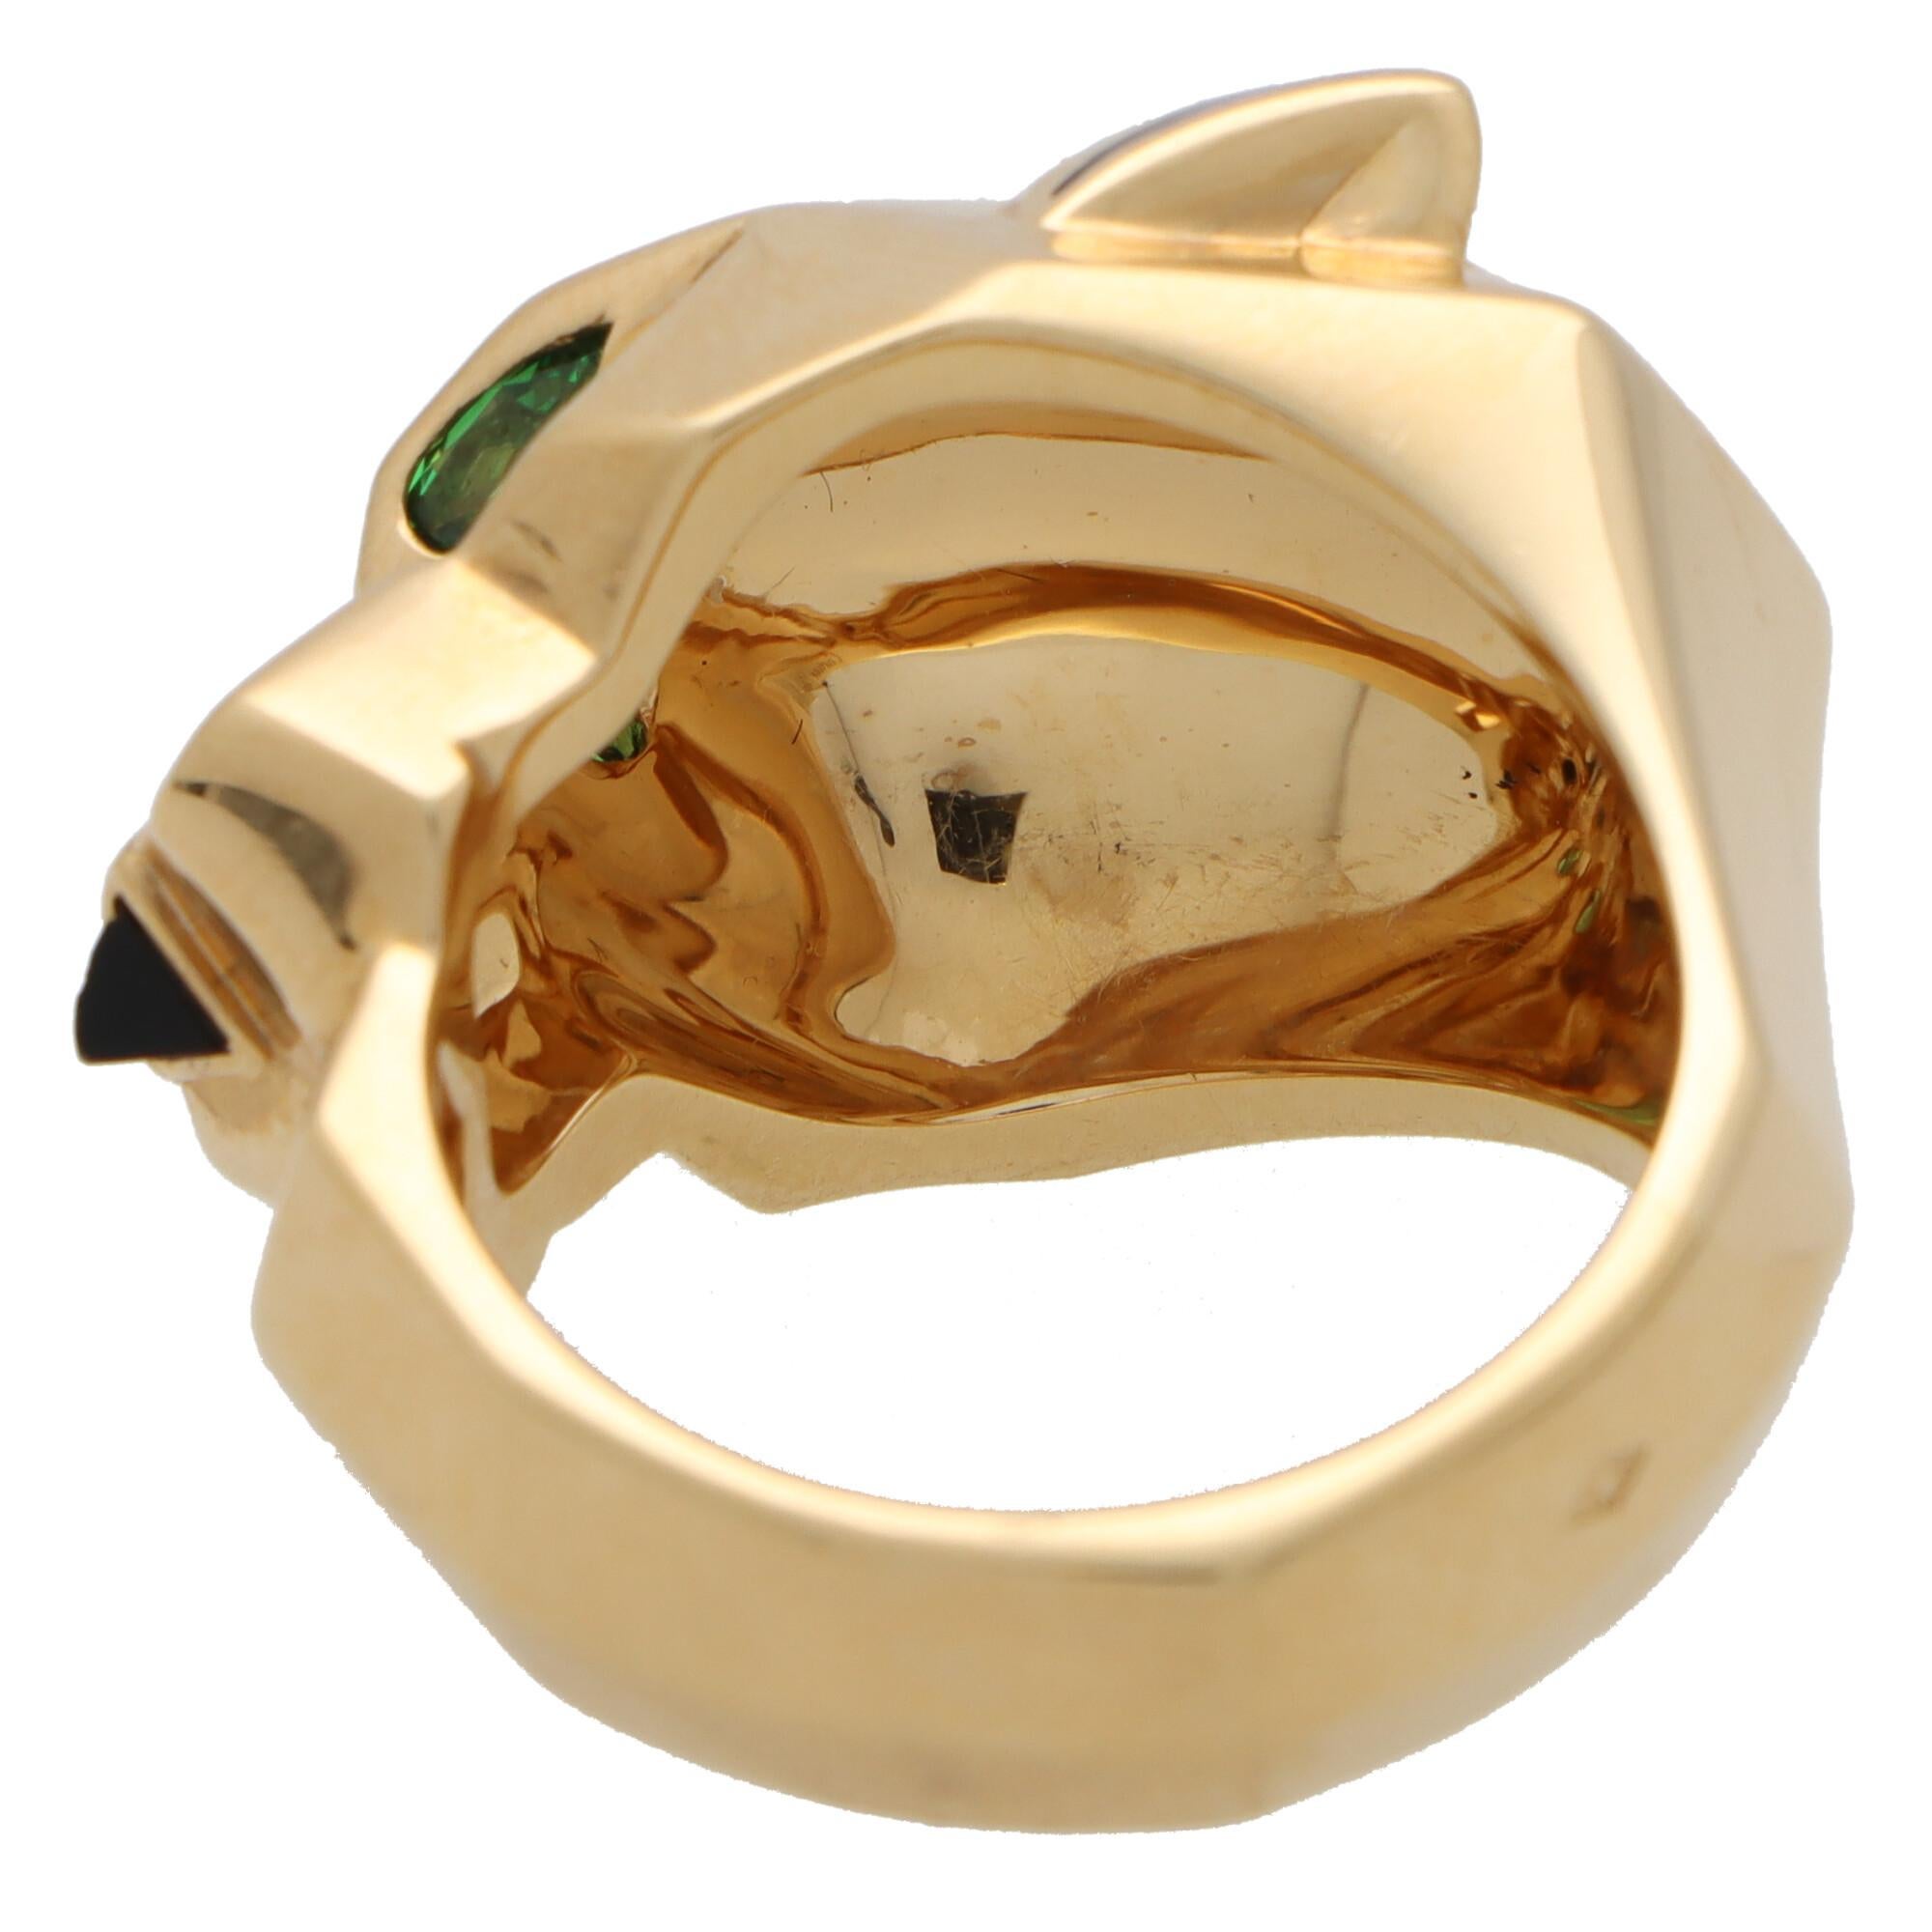 Women's or Men's Vintage Panthère de Cartier Ring with Tsavorite Garents Onyx and Lacquer in Gold